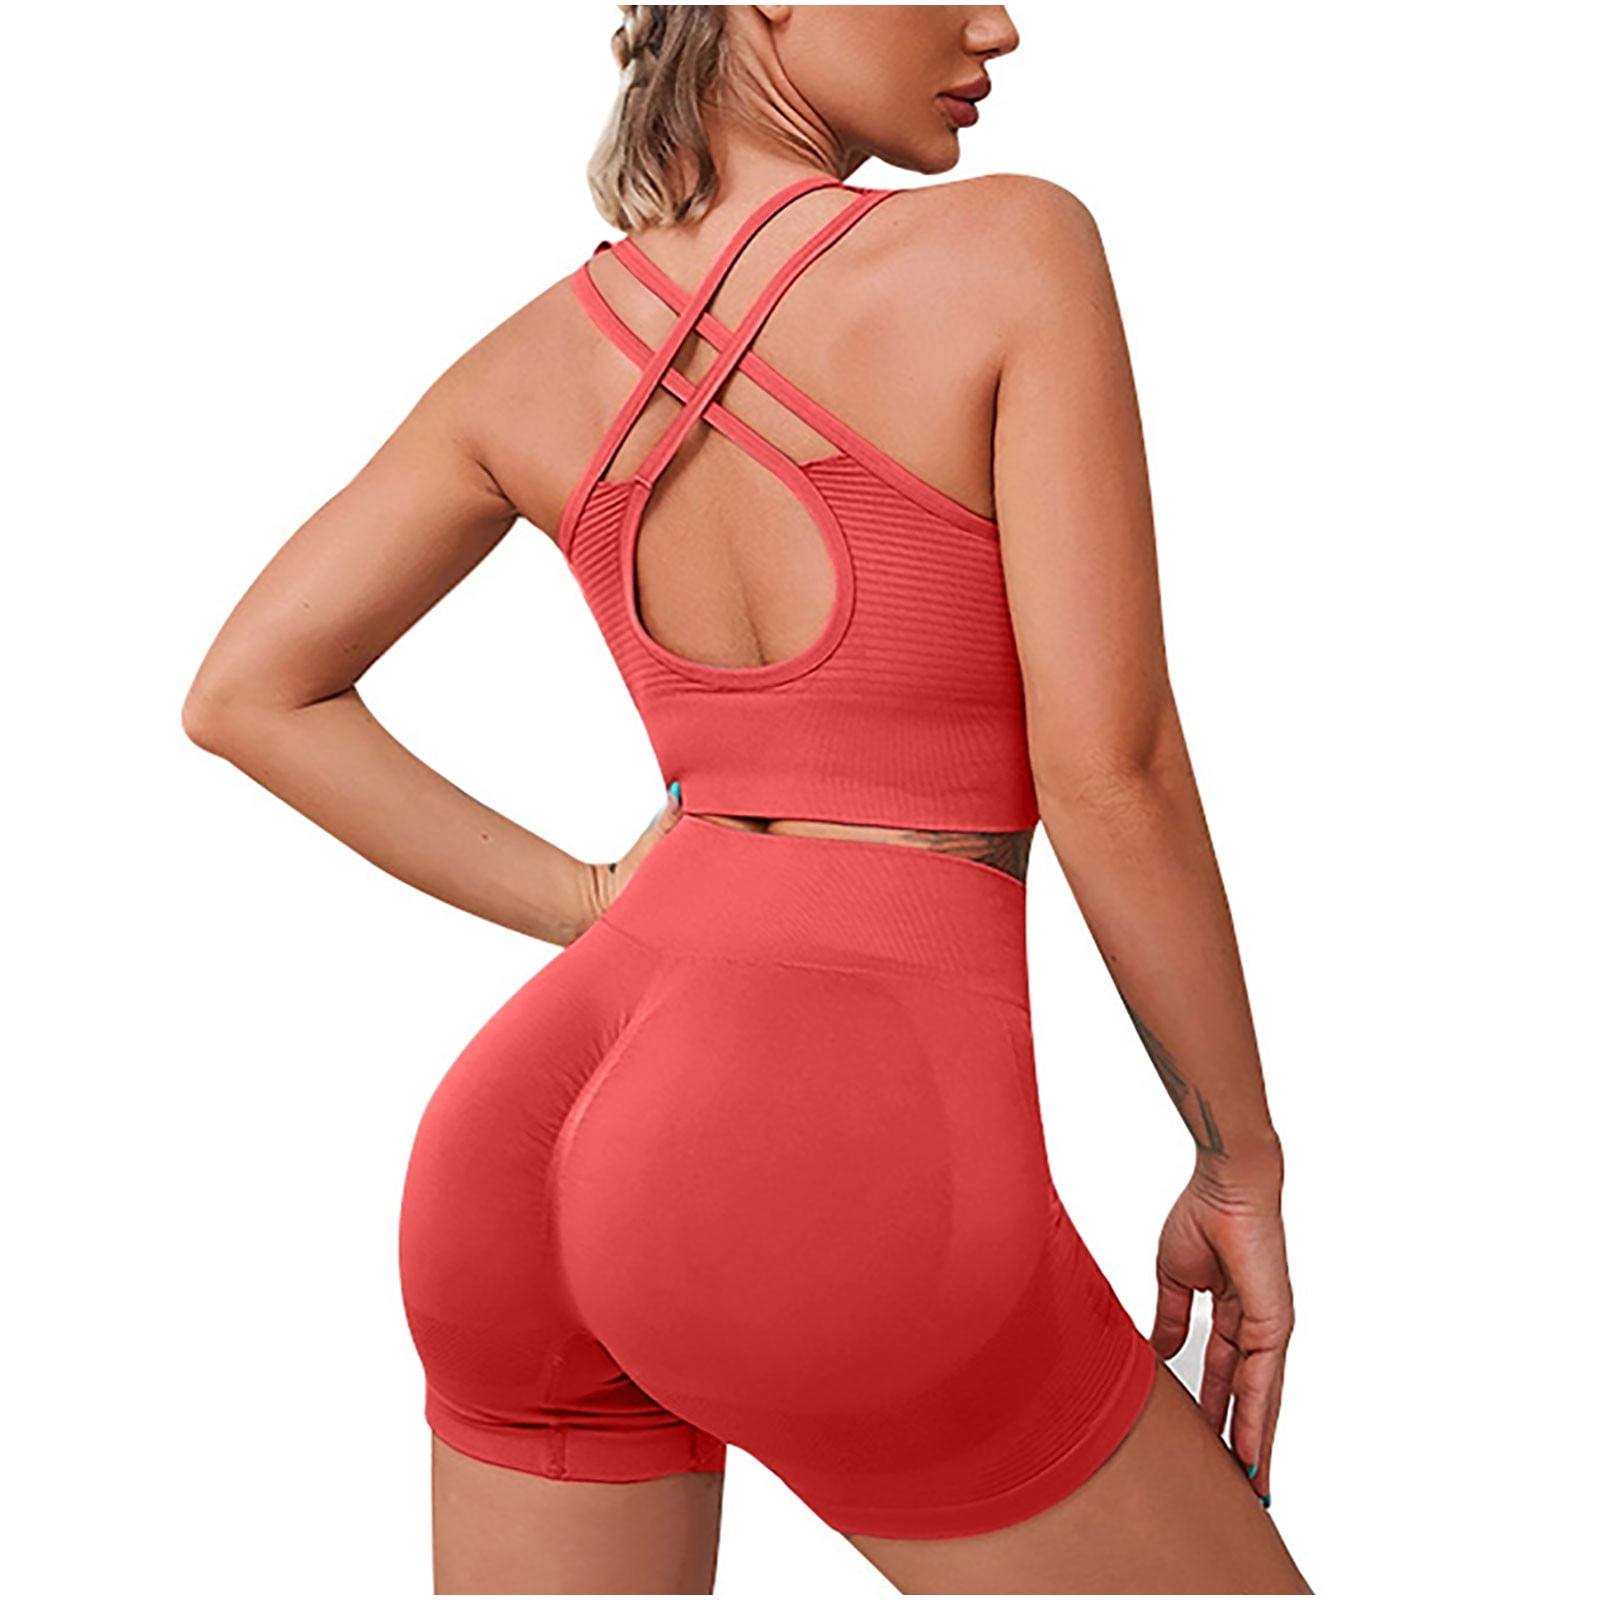 REORIAFEE Workout Sets for Women 2 Piece Yoga Outfits Gym Matching Set 80s  Outfit Women's Casual Seamless Knit Sports Yoga Buttock Lifting Tight